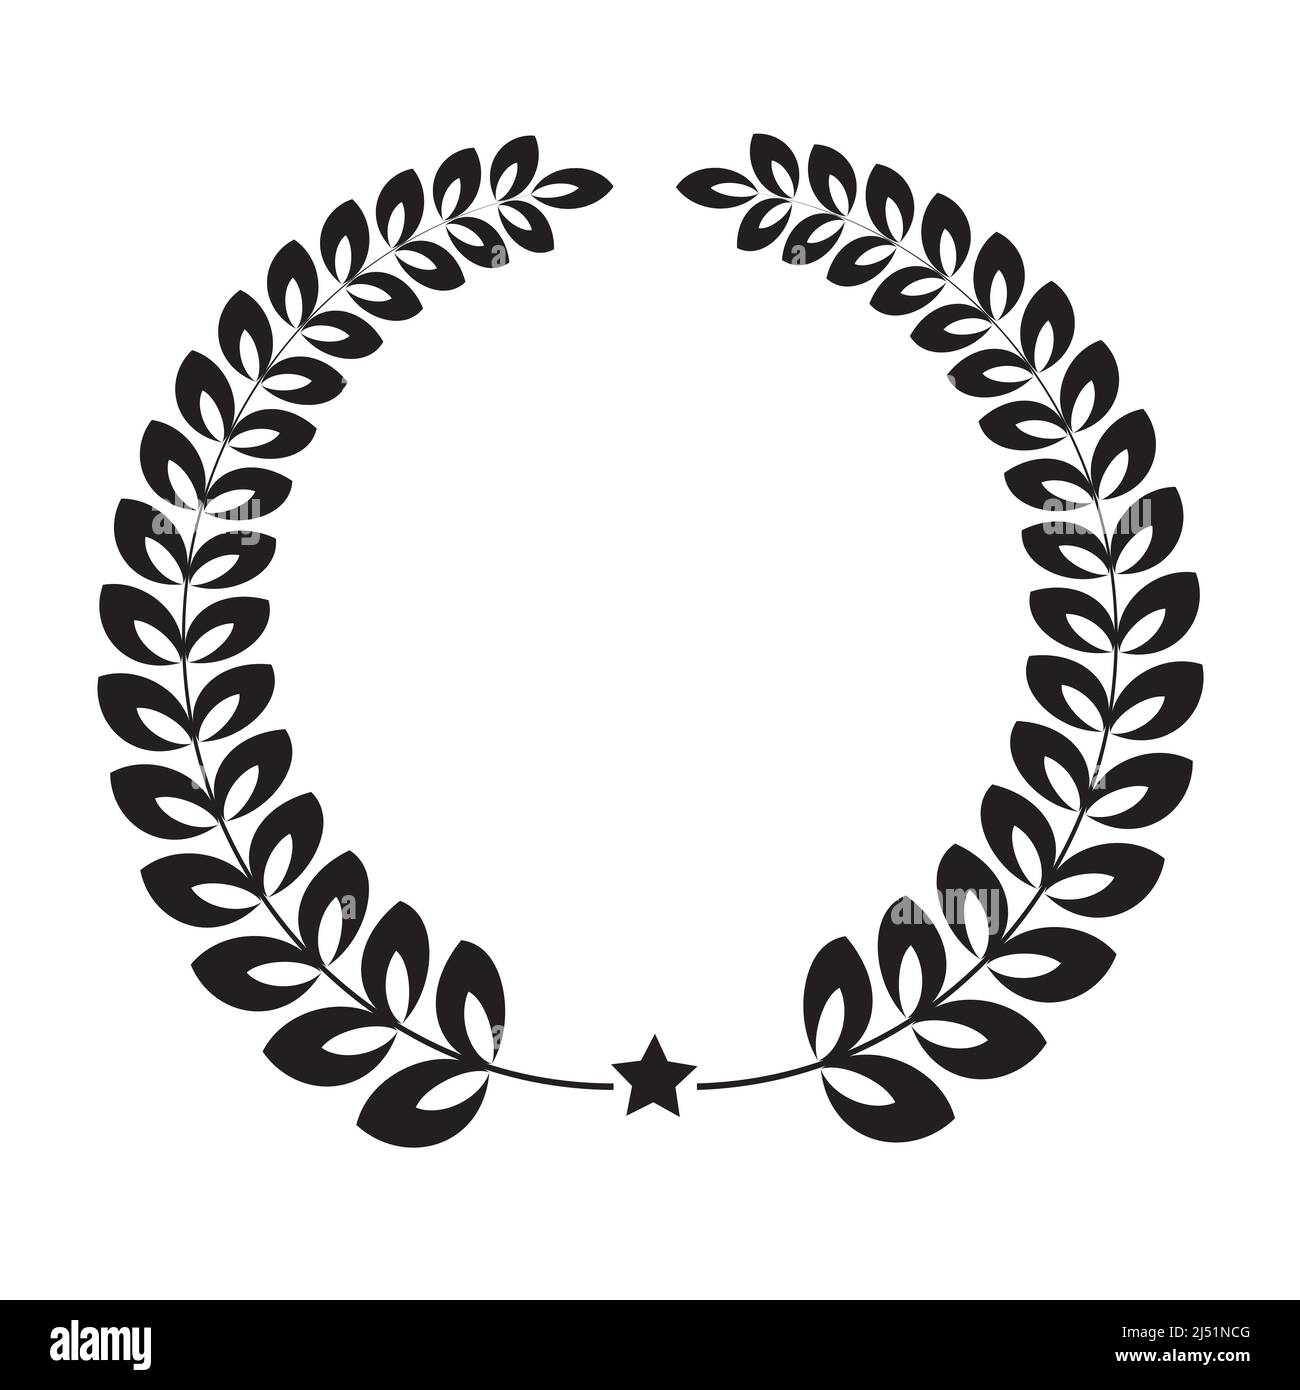 Laurel wreath silhouette made of dried branches and leaves illustration isolated on a white background Stock Vector